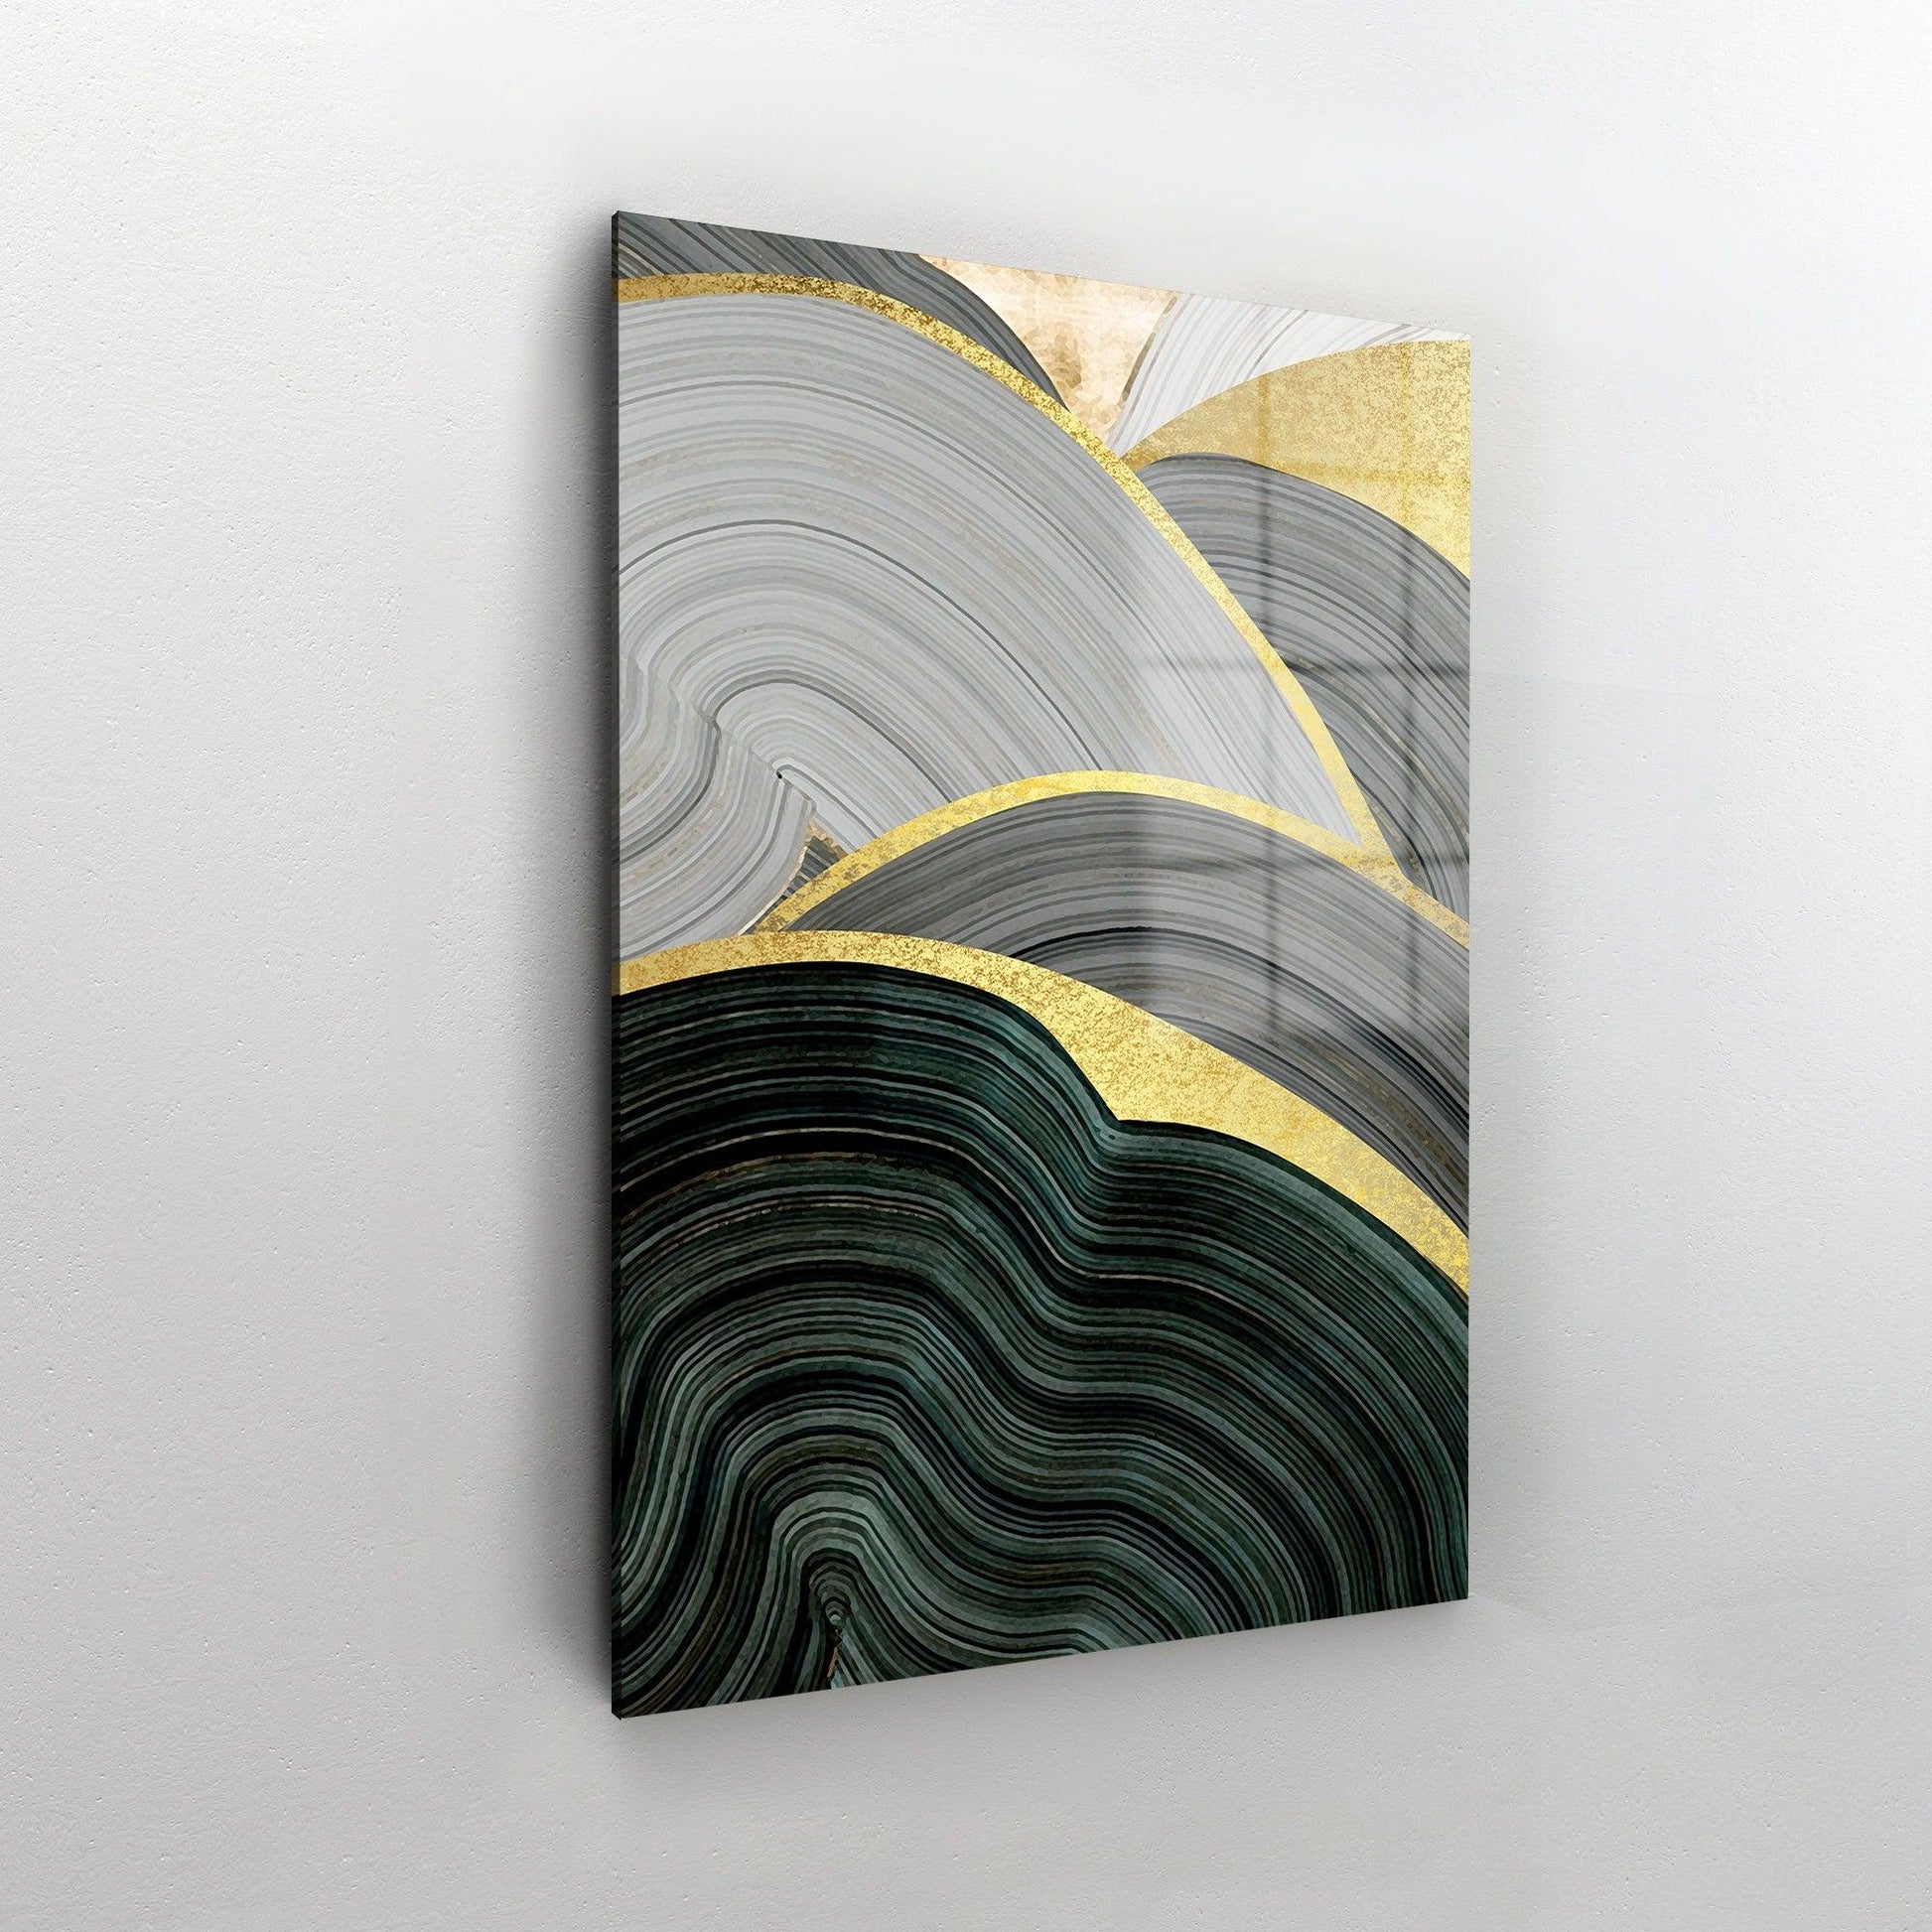 Black and Gold Waves glass painting wall art| Black With Gold Accent Wall Art, gold accent wall art, farmhouse wall decor bedroom, vertical - TrendiArt